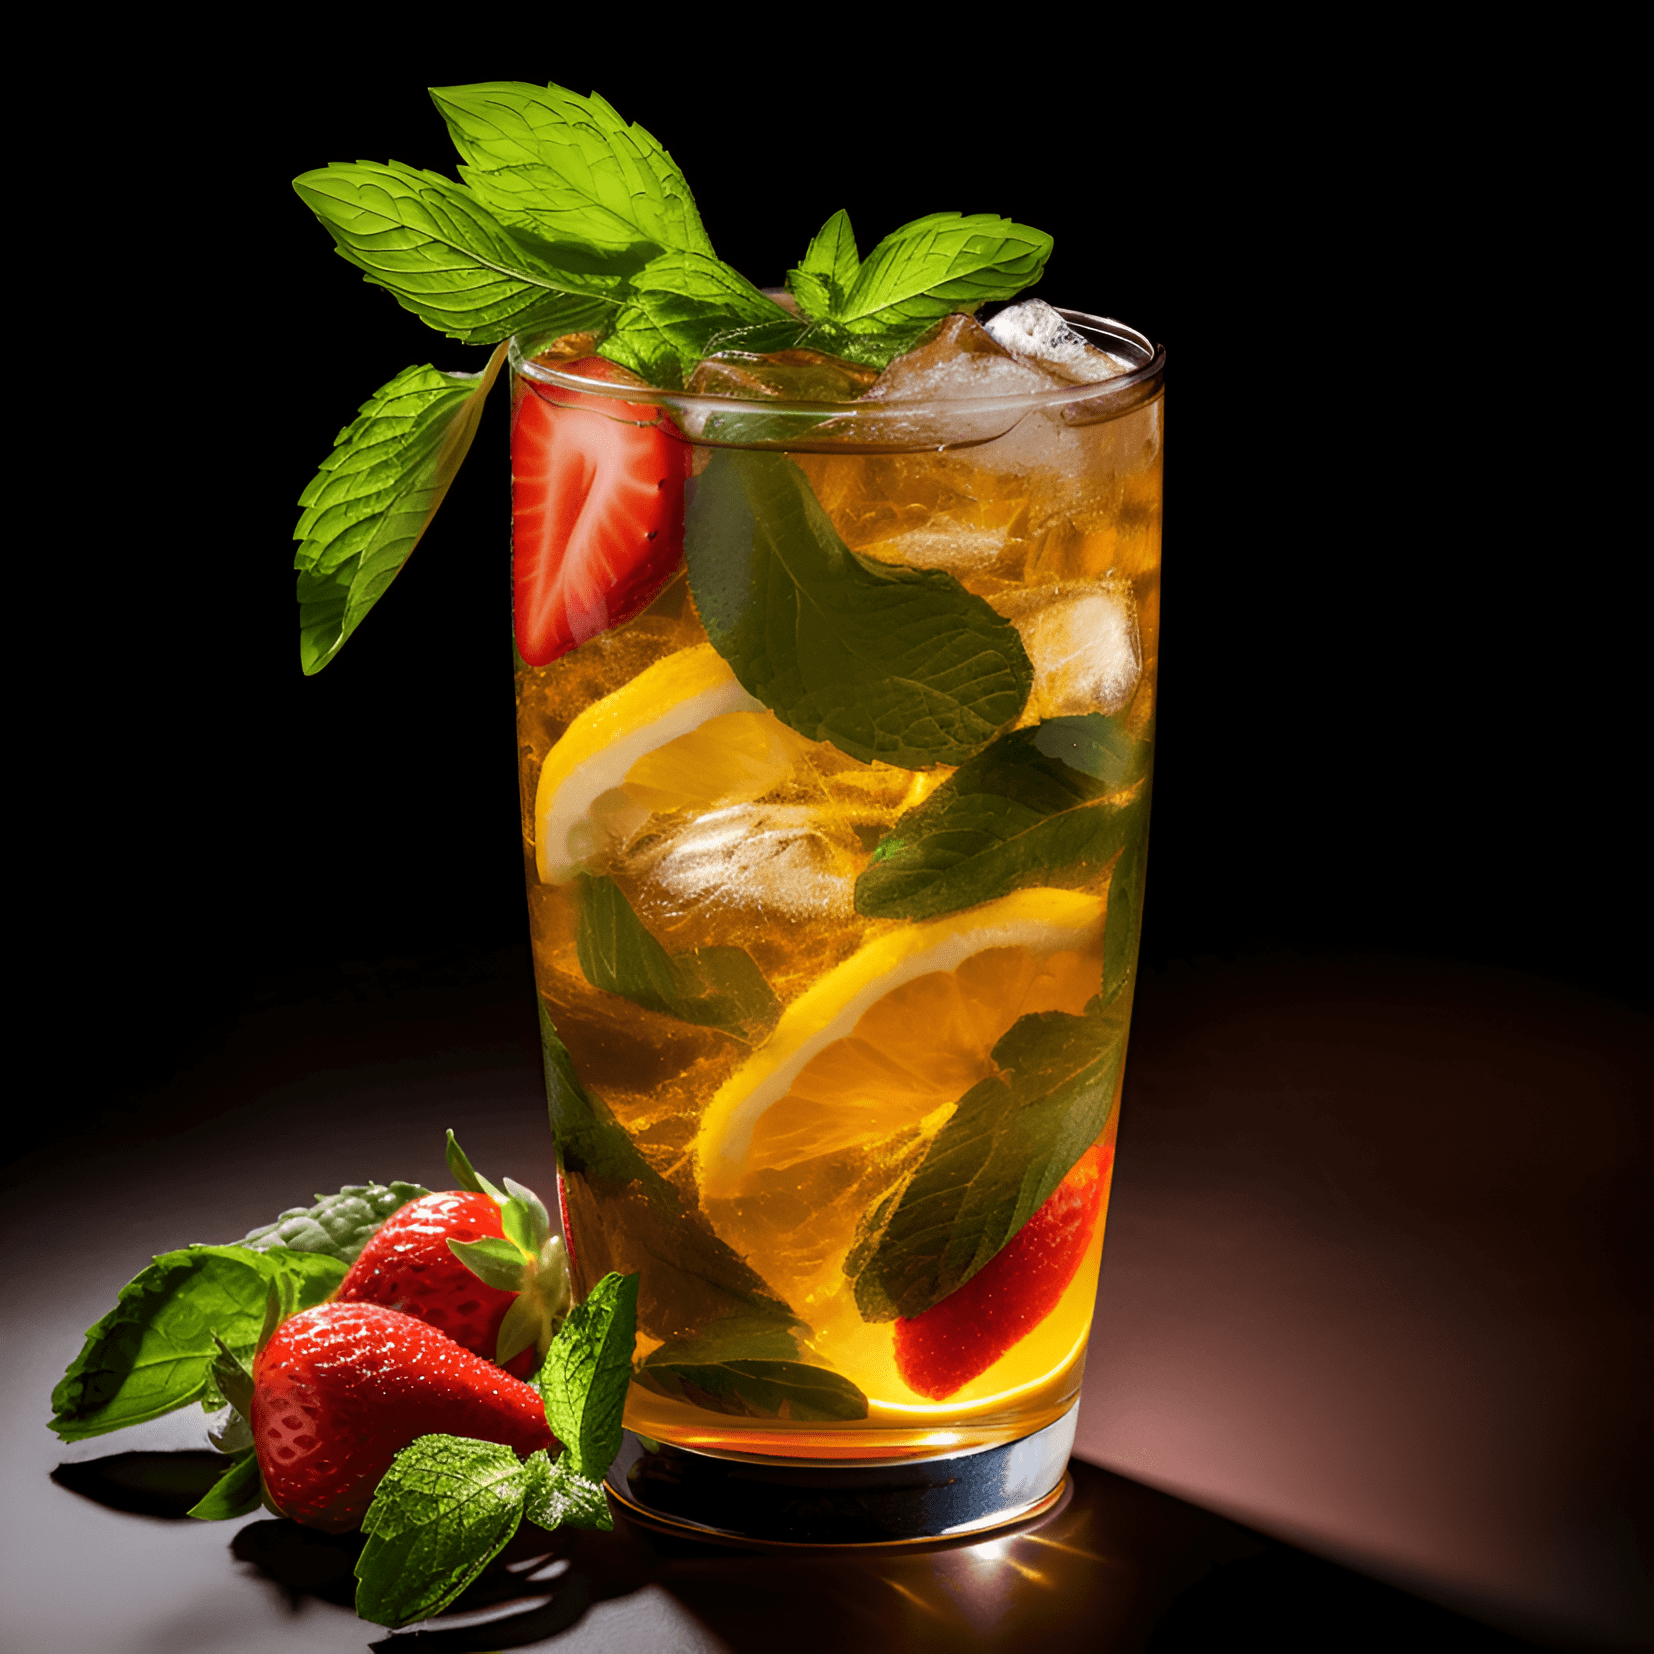 The Pimm's Cup is a refreshing, fruity, and slightly sweet cocktail with a hint of bitterness from the Pimm's No. 1. It has a light and crisp taste, perfect for warm summer days.